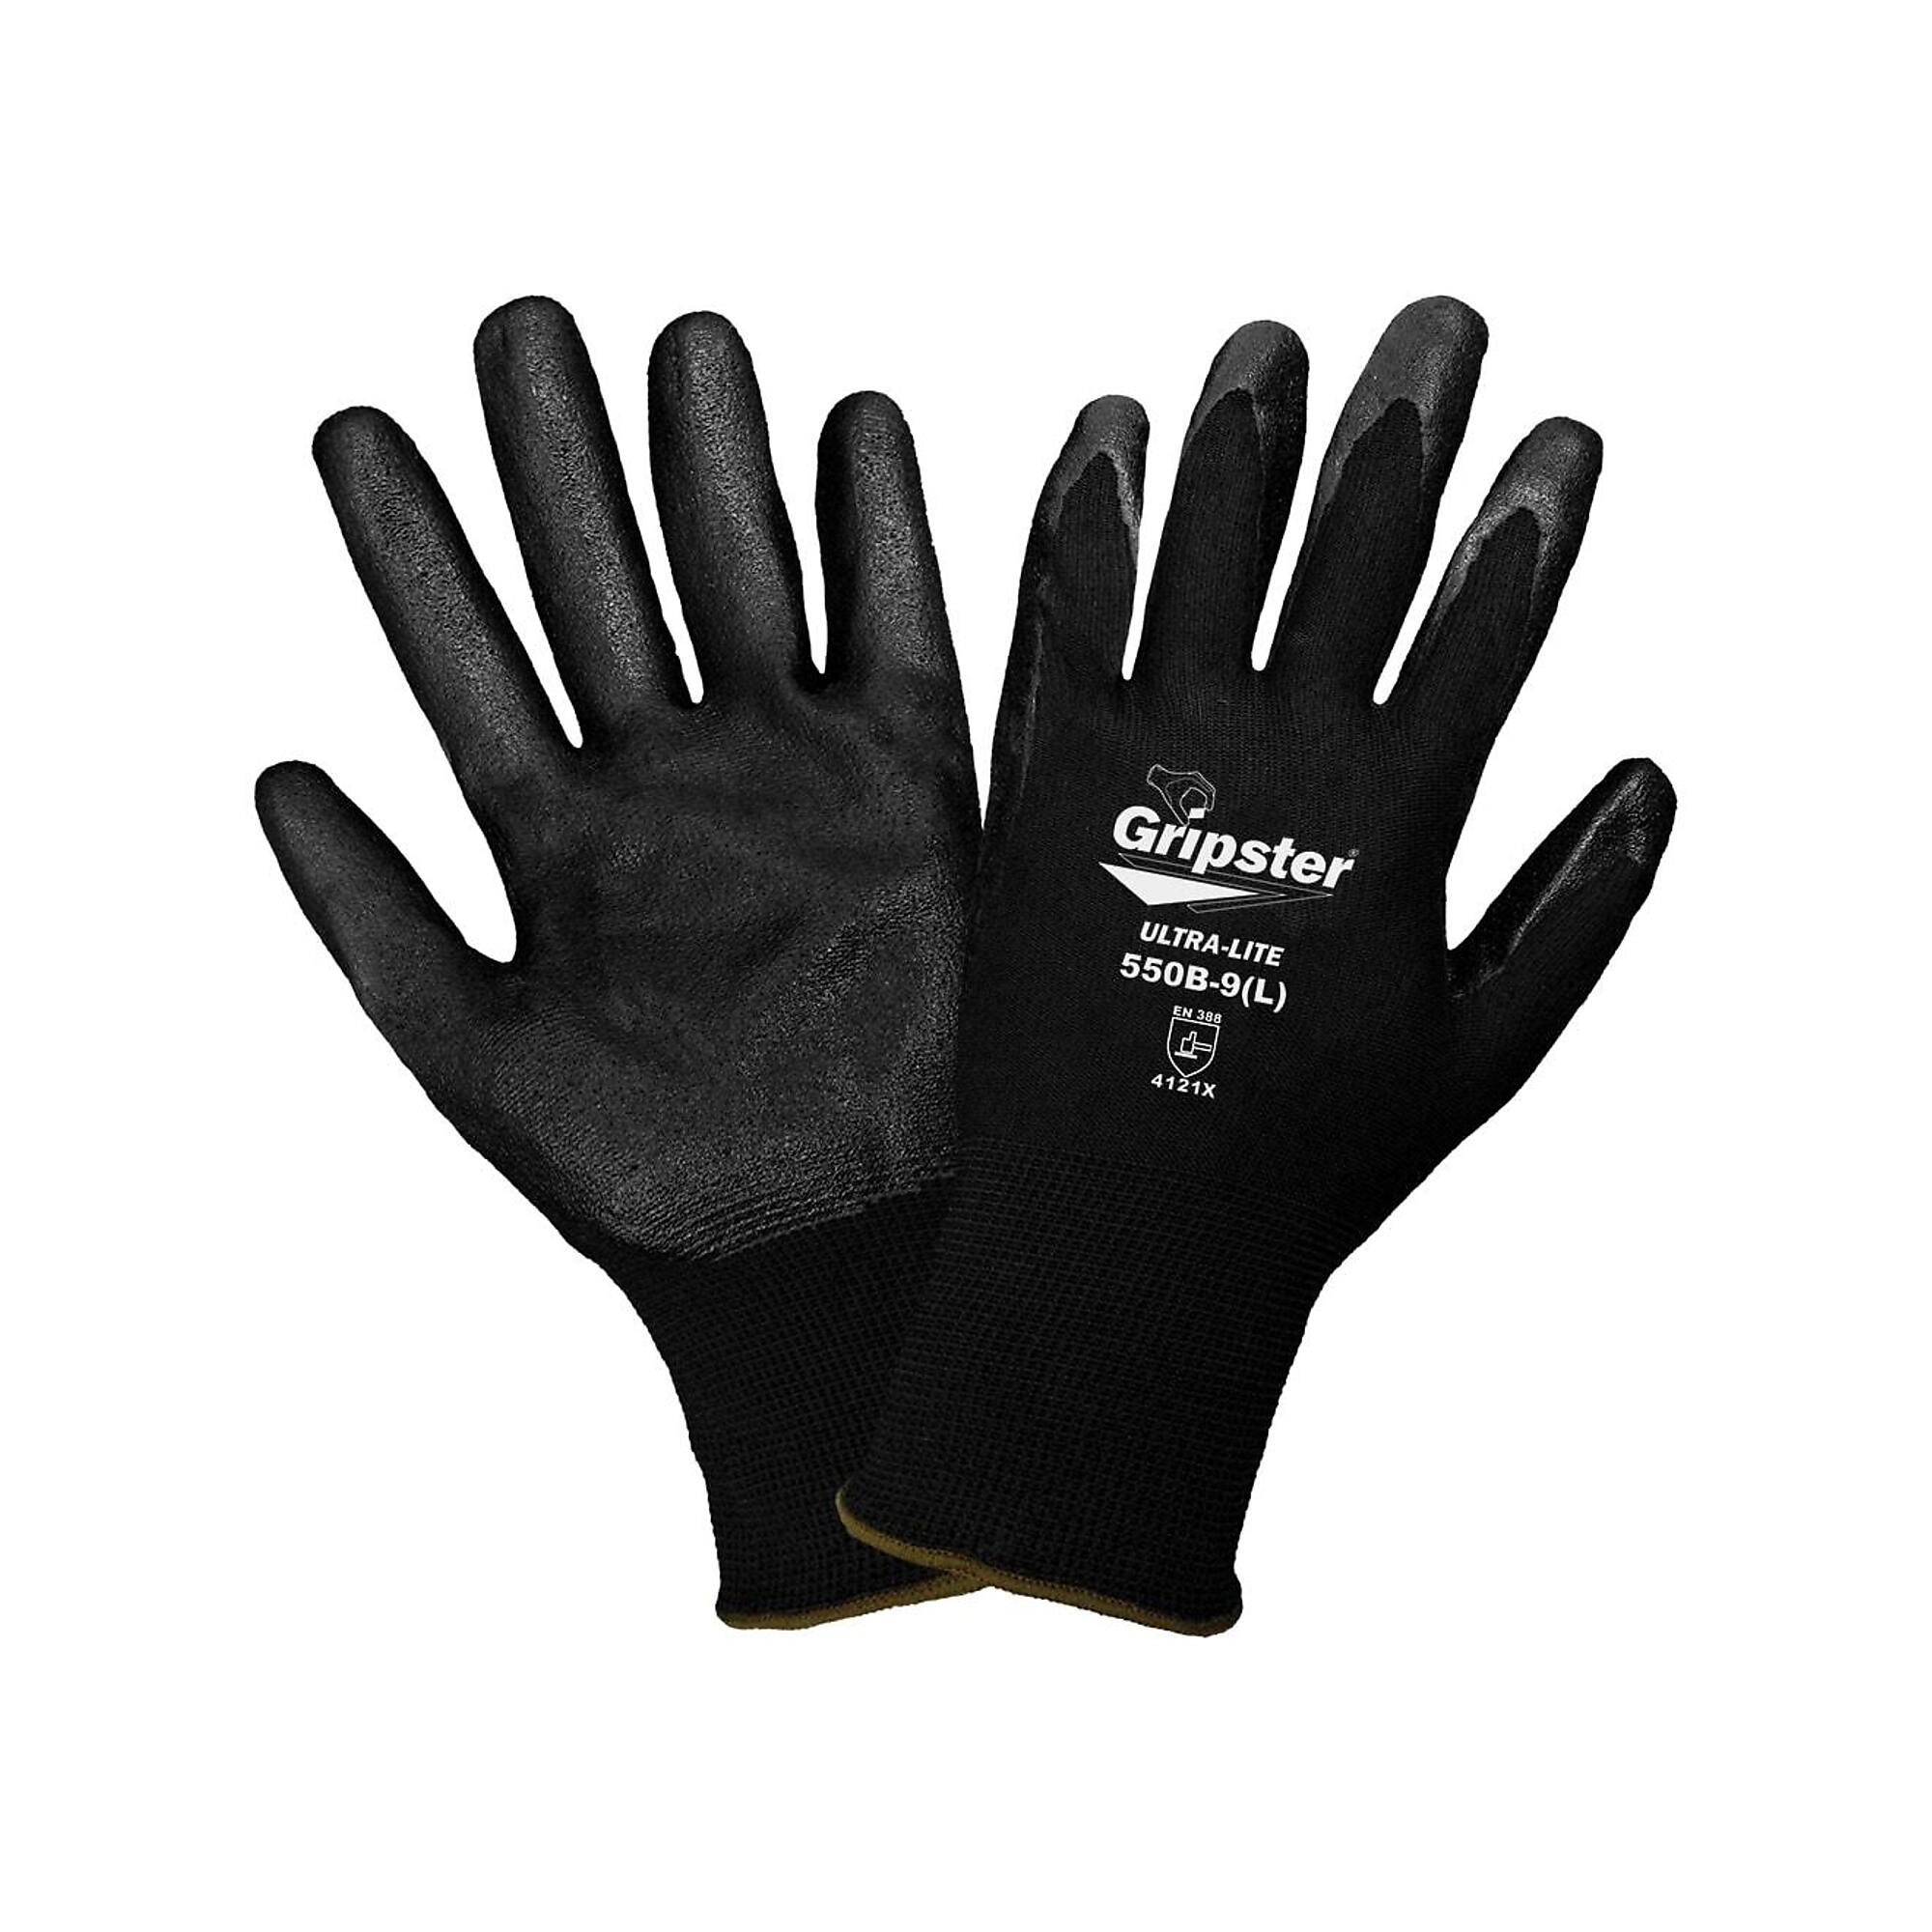 Global Glove Gripster , Black, Black Nitrile Dip, Cut Resistant A1 Gloves - 12 Pairs, Size M, Color Black, Included (qty.) 12 Model 550B-8(M)